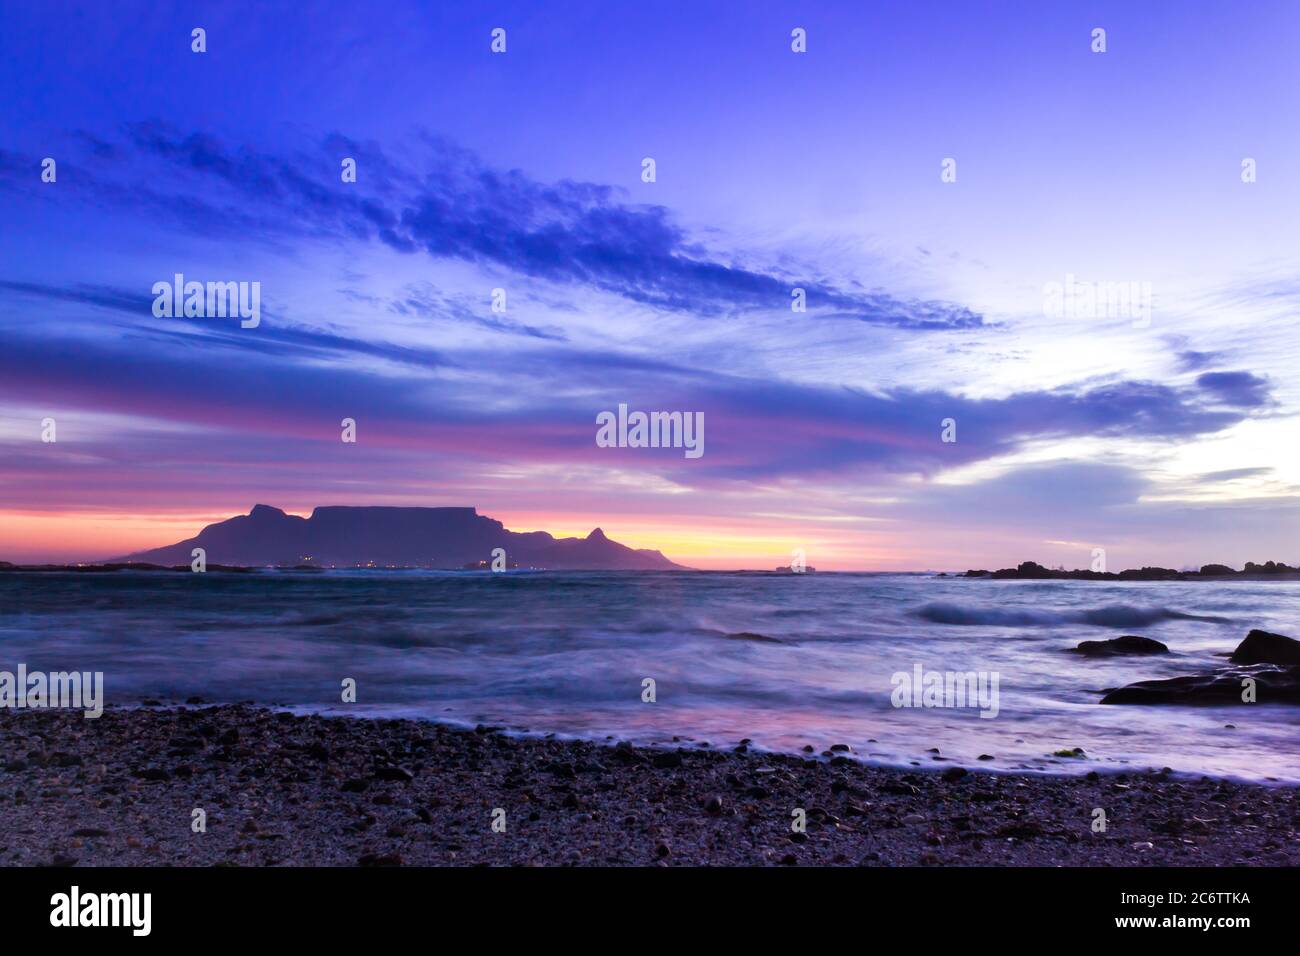 View of Table Mountain at sunrise, Cape Town, South Africa from Milnerton Beach coastline Stock Photo